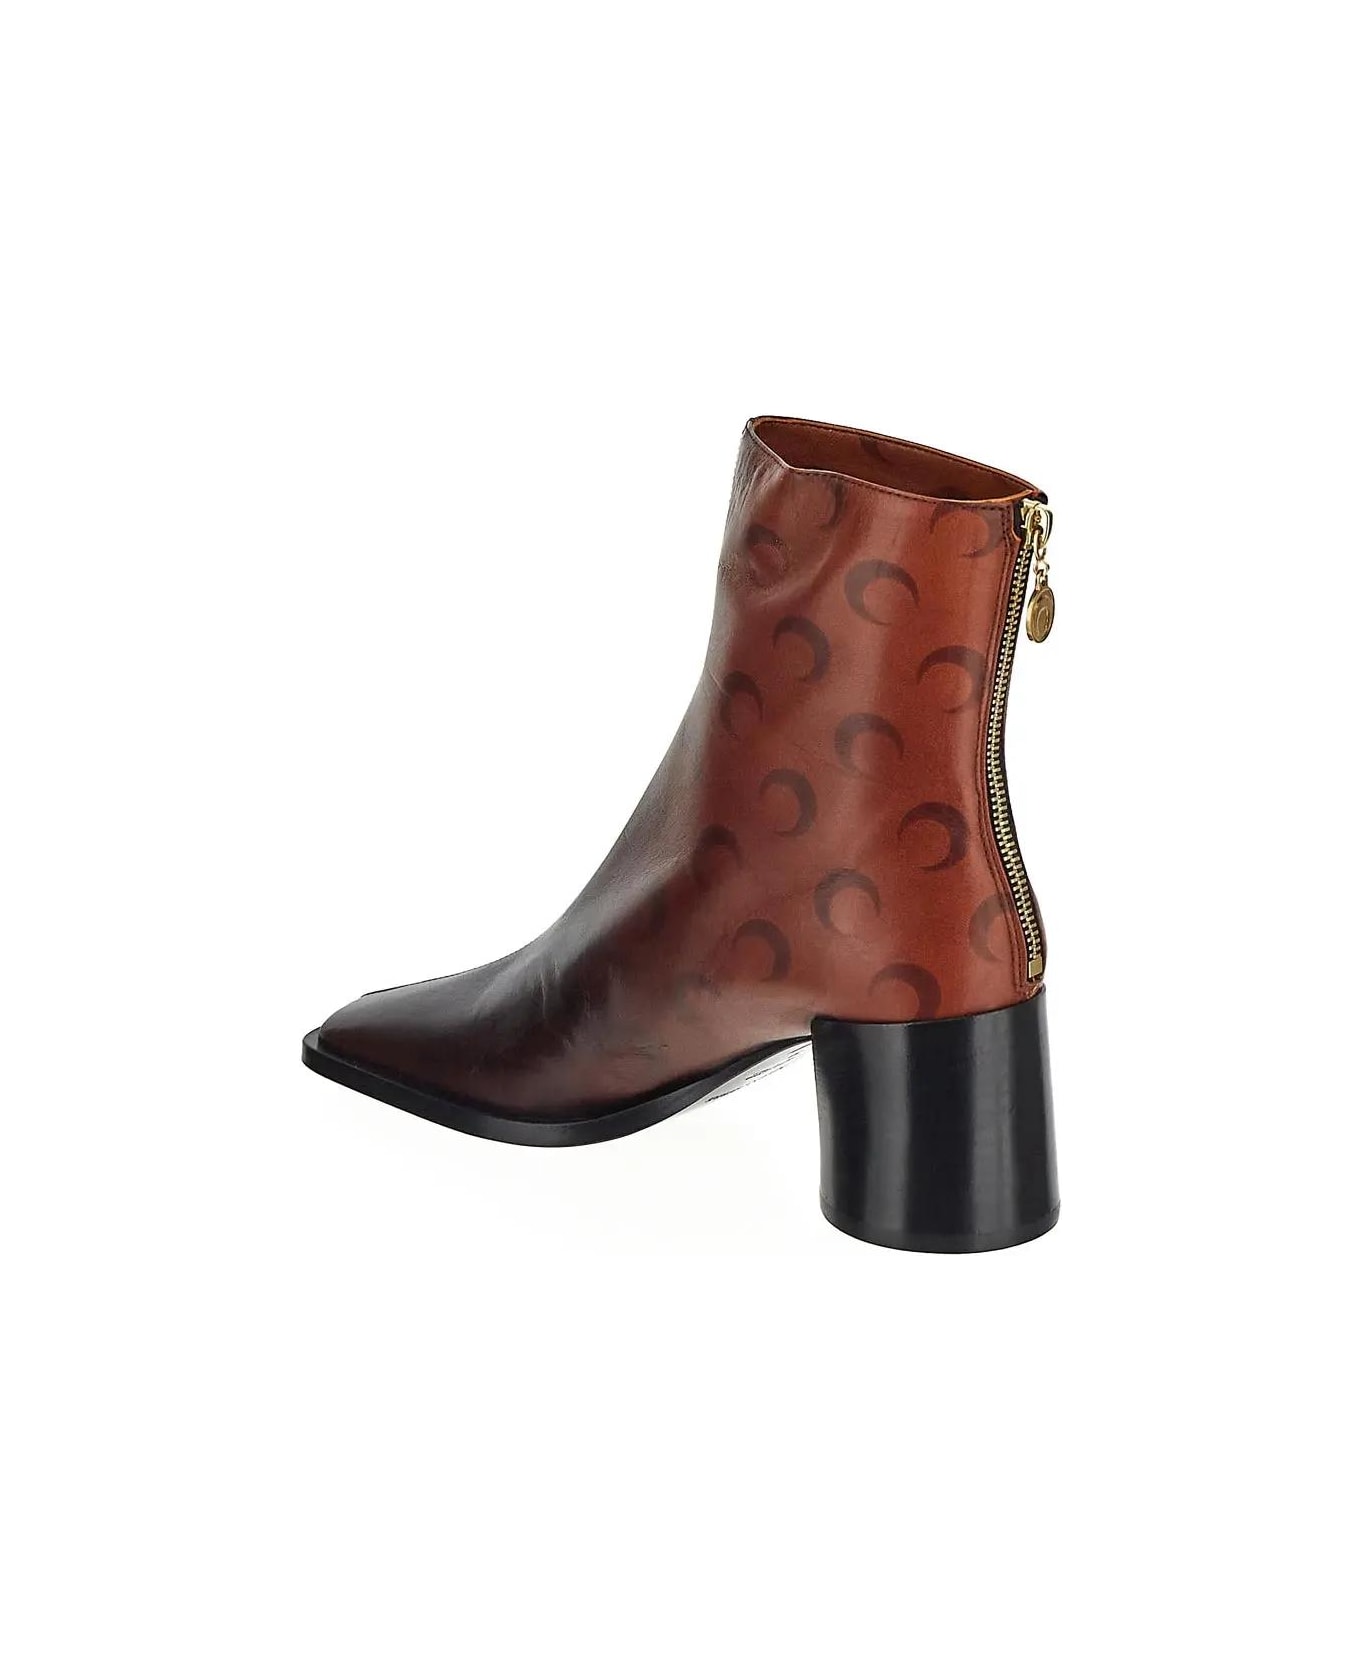 Marine Serre Airbrushed Leather Ankle Boots - Red